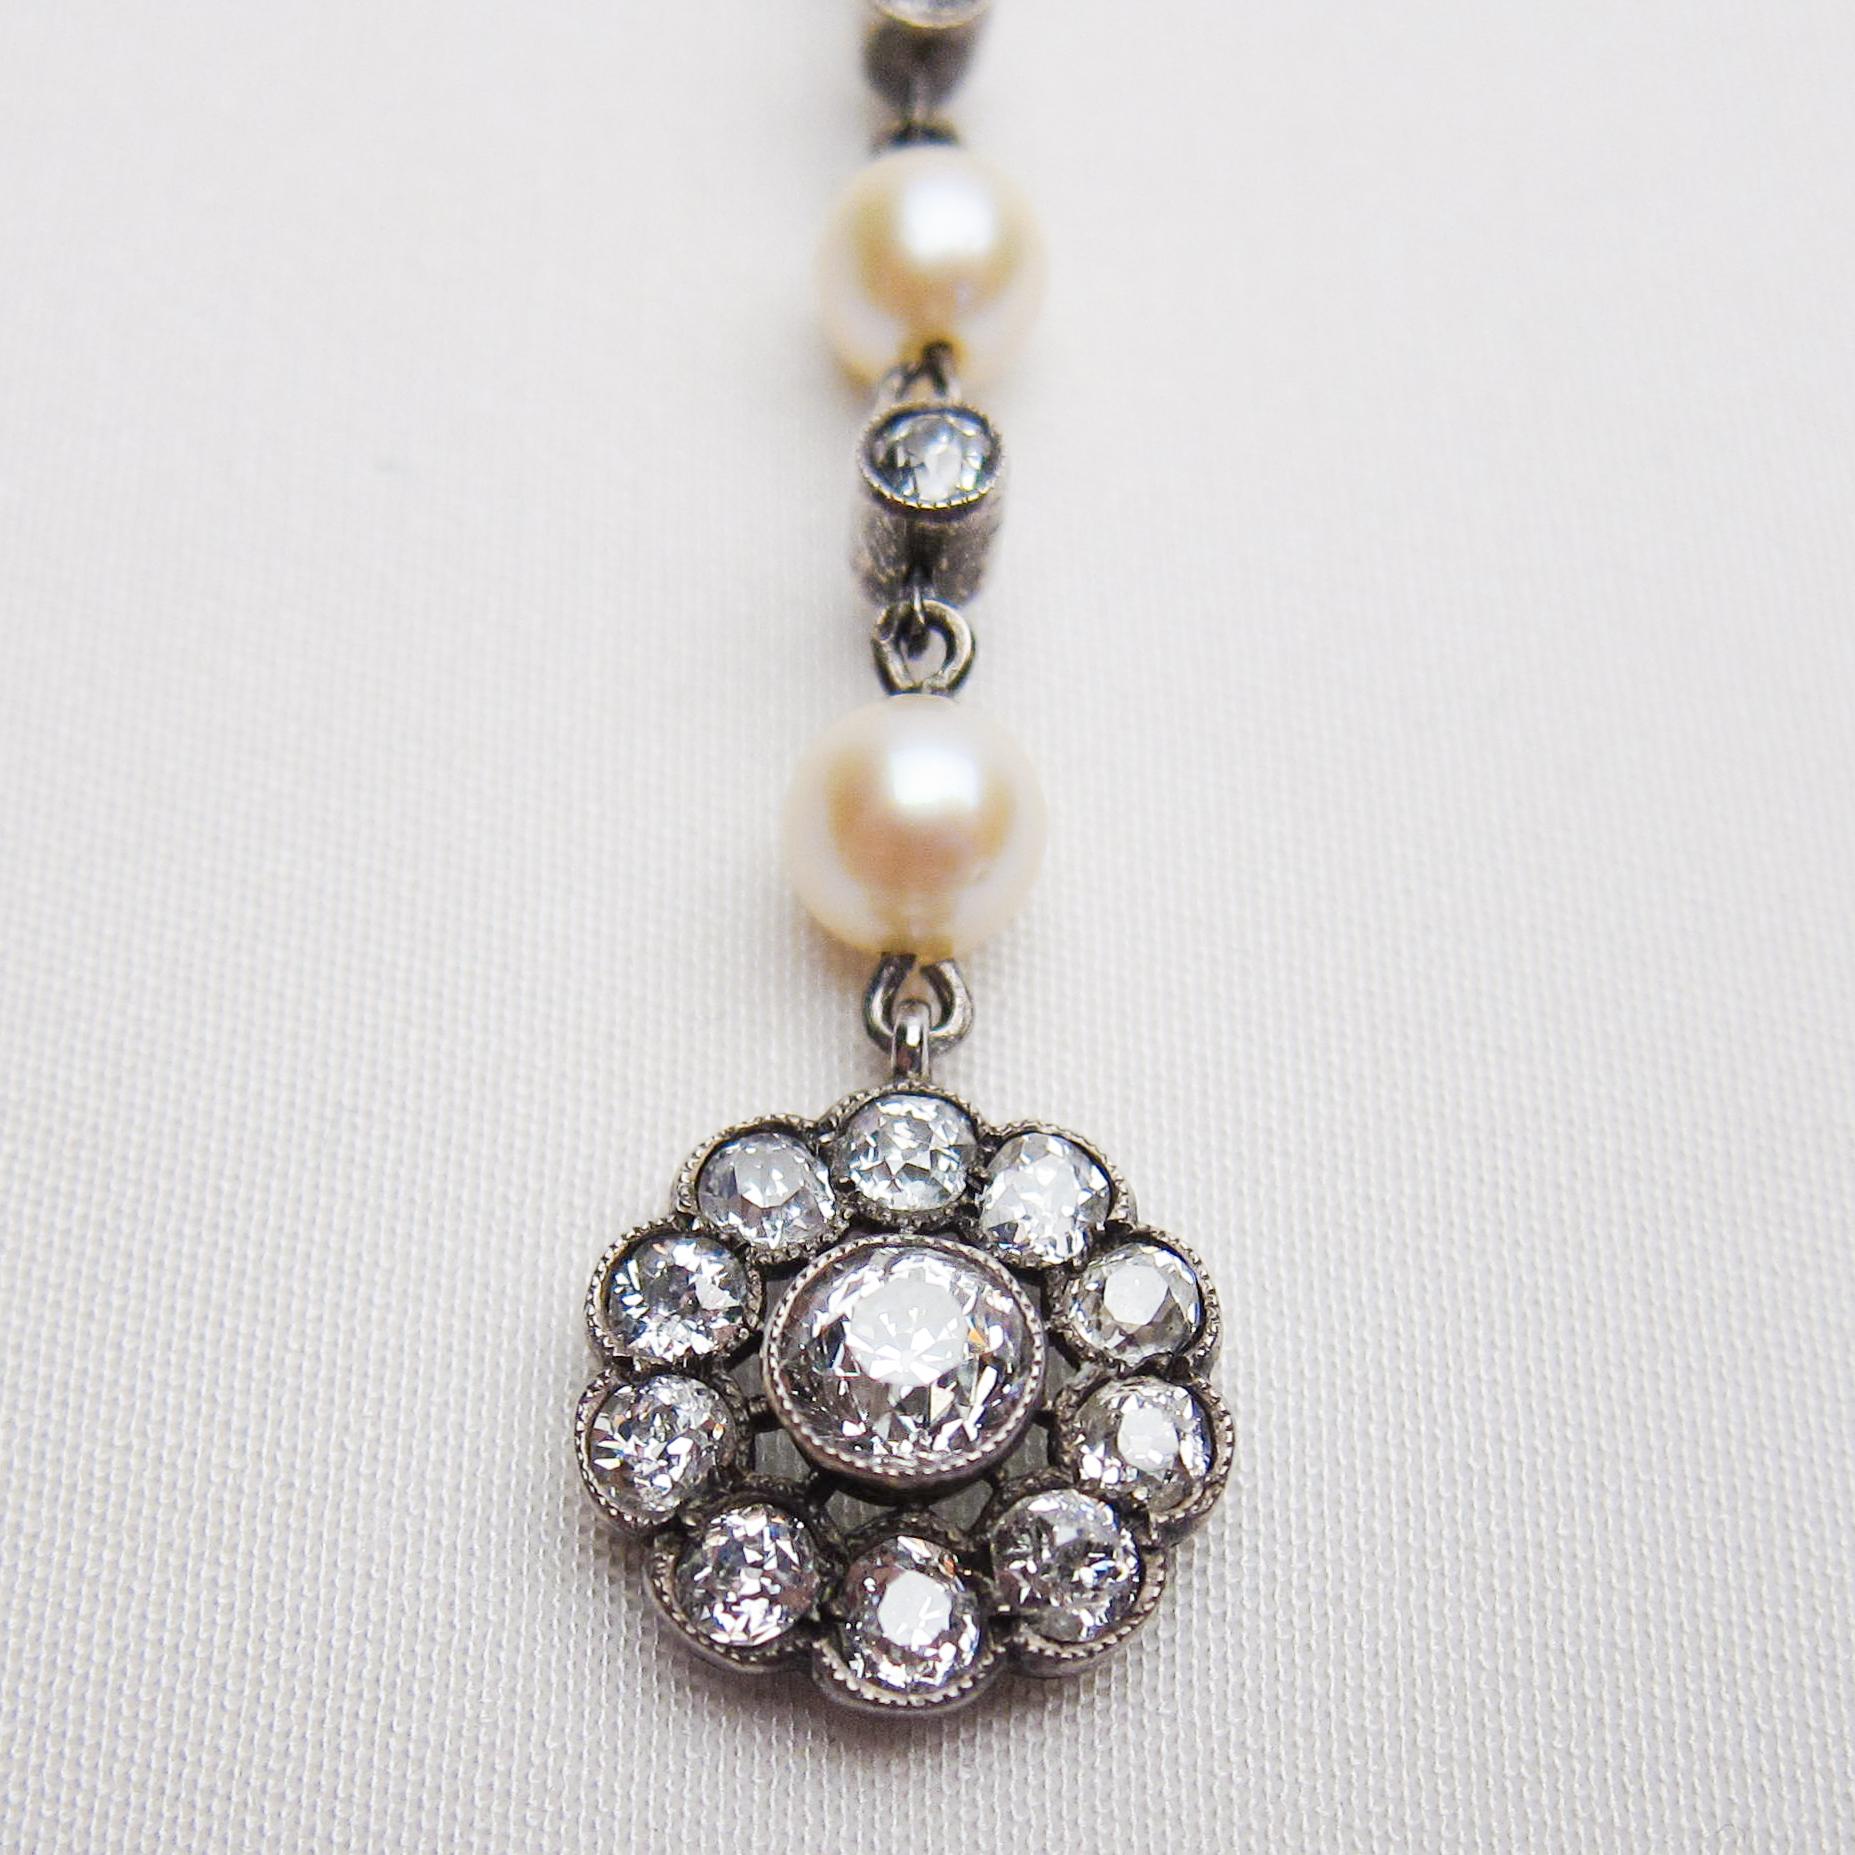 Circa 1910. This stunning Edwardian women's pendant features a cluster setting accented with 11 bezel-set, old European-cut diamonds surmounted by three cultured saltwater pearls, two bezel-set old European-cut diamonds, and 12 bead-set rose-cut